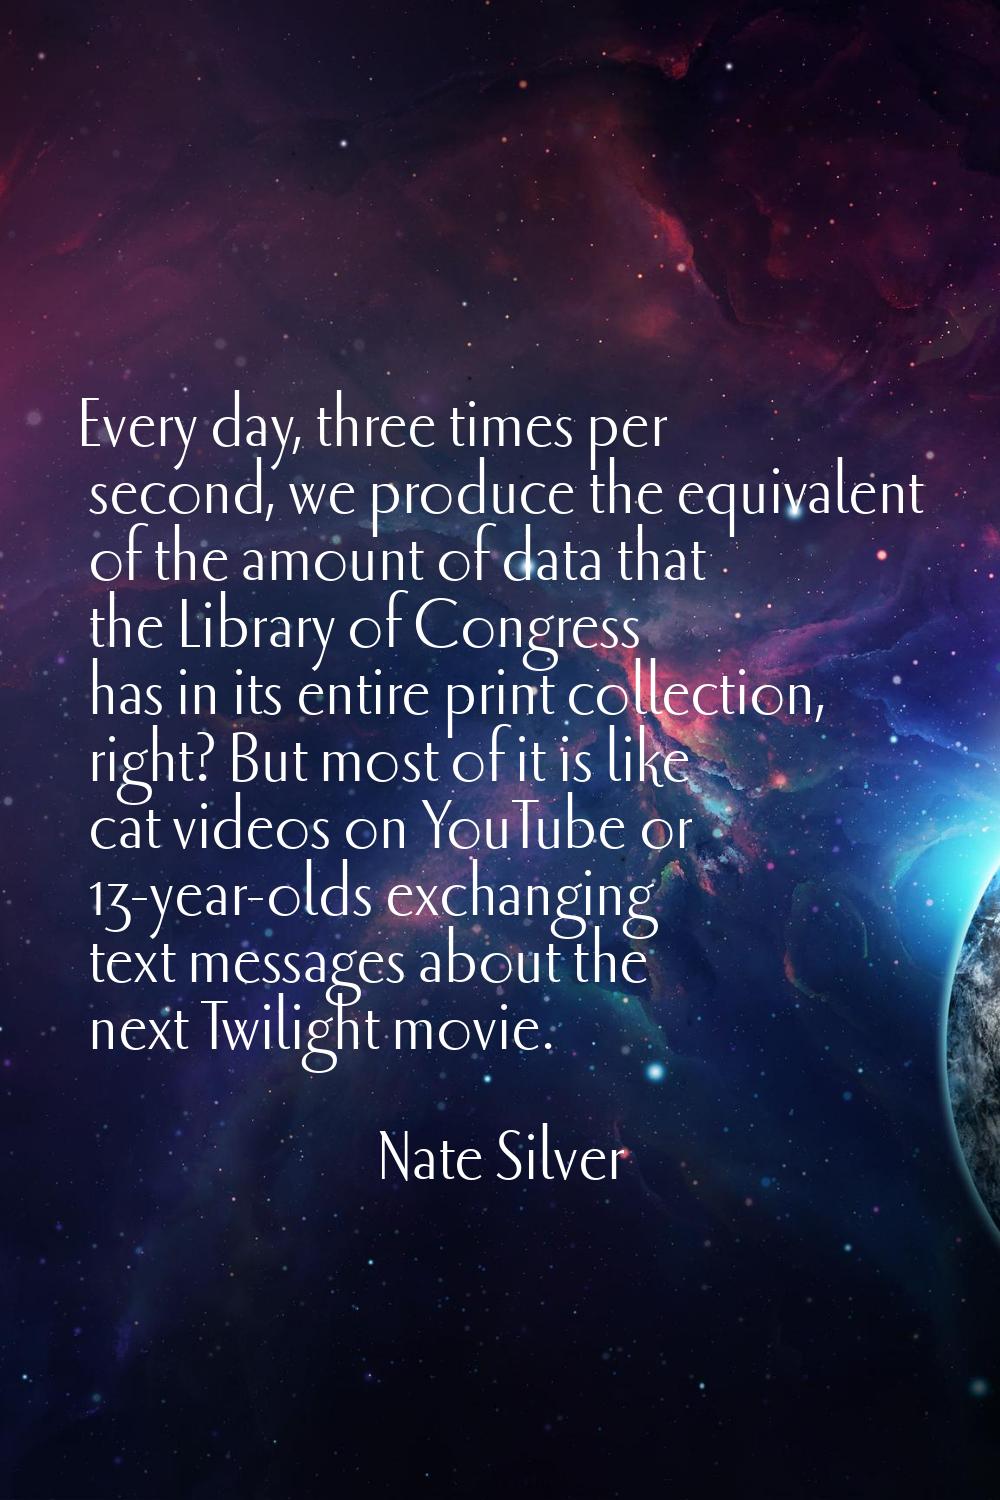 Every day, three times per second, we produce the equivalent of the amount of data that the Library